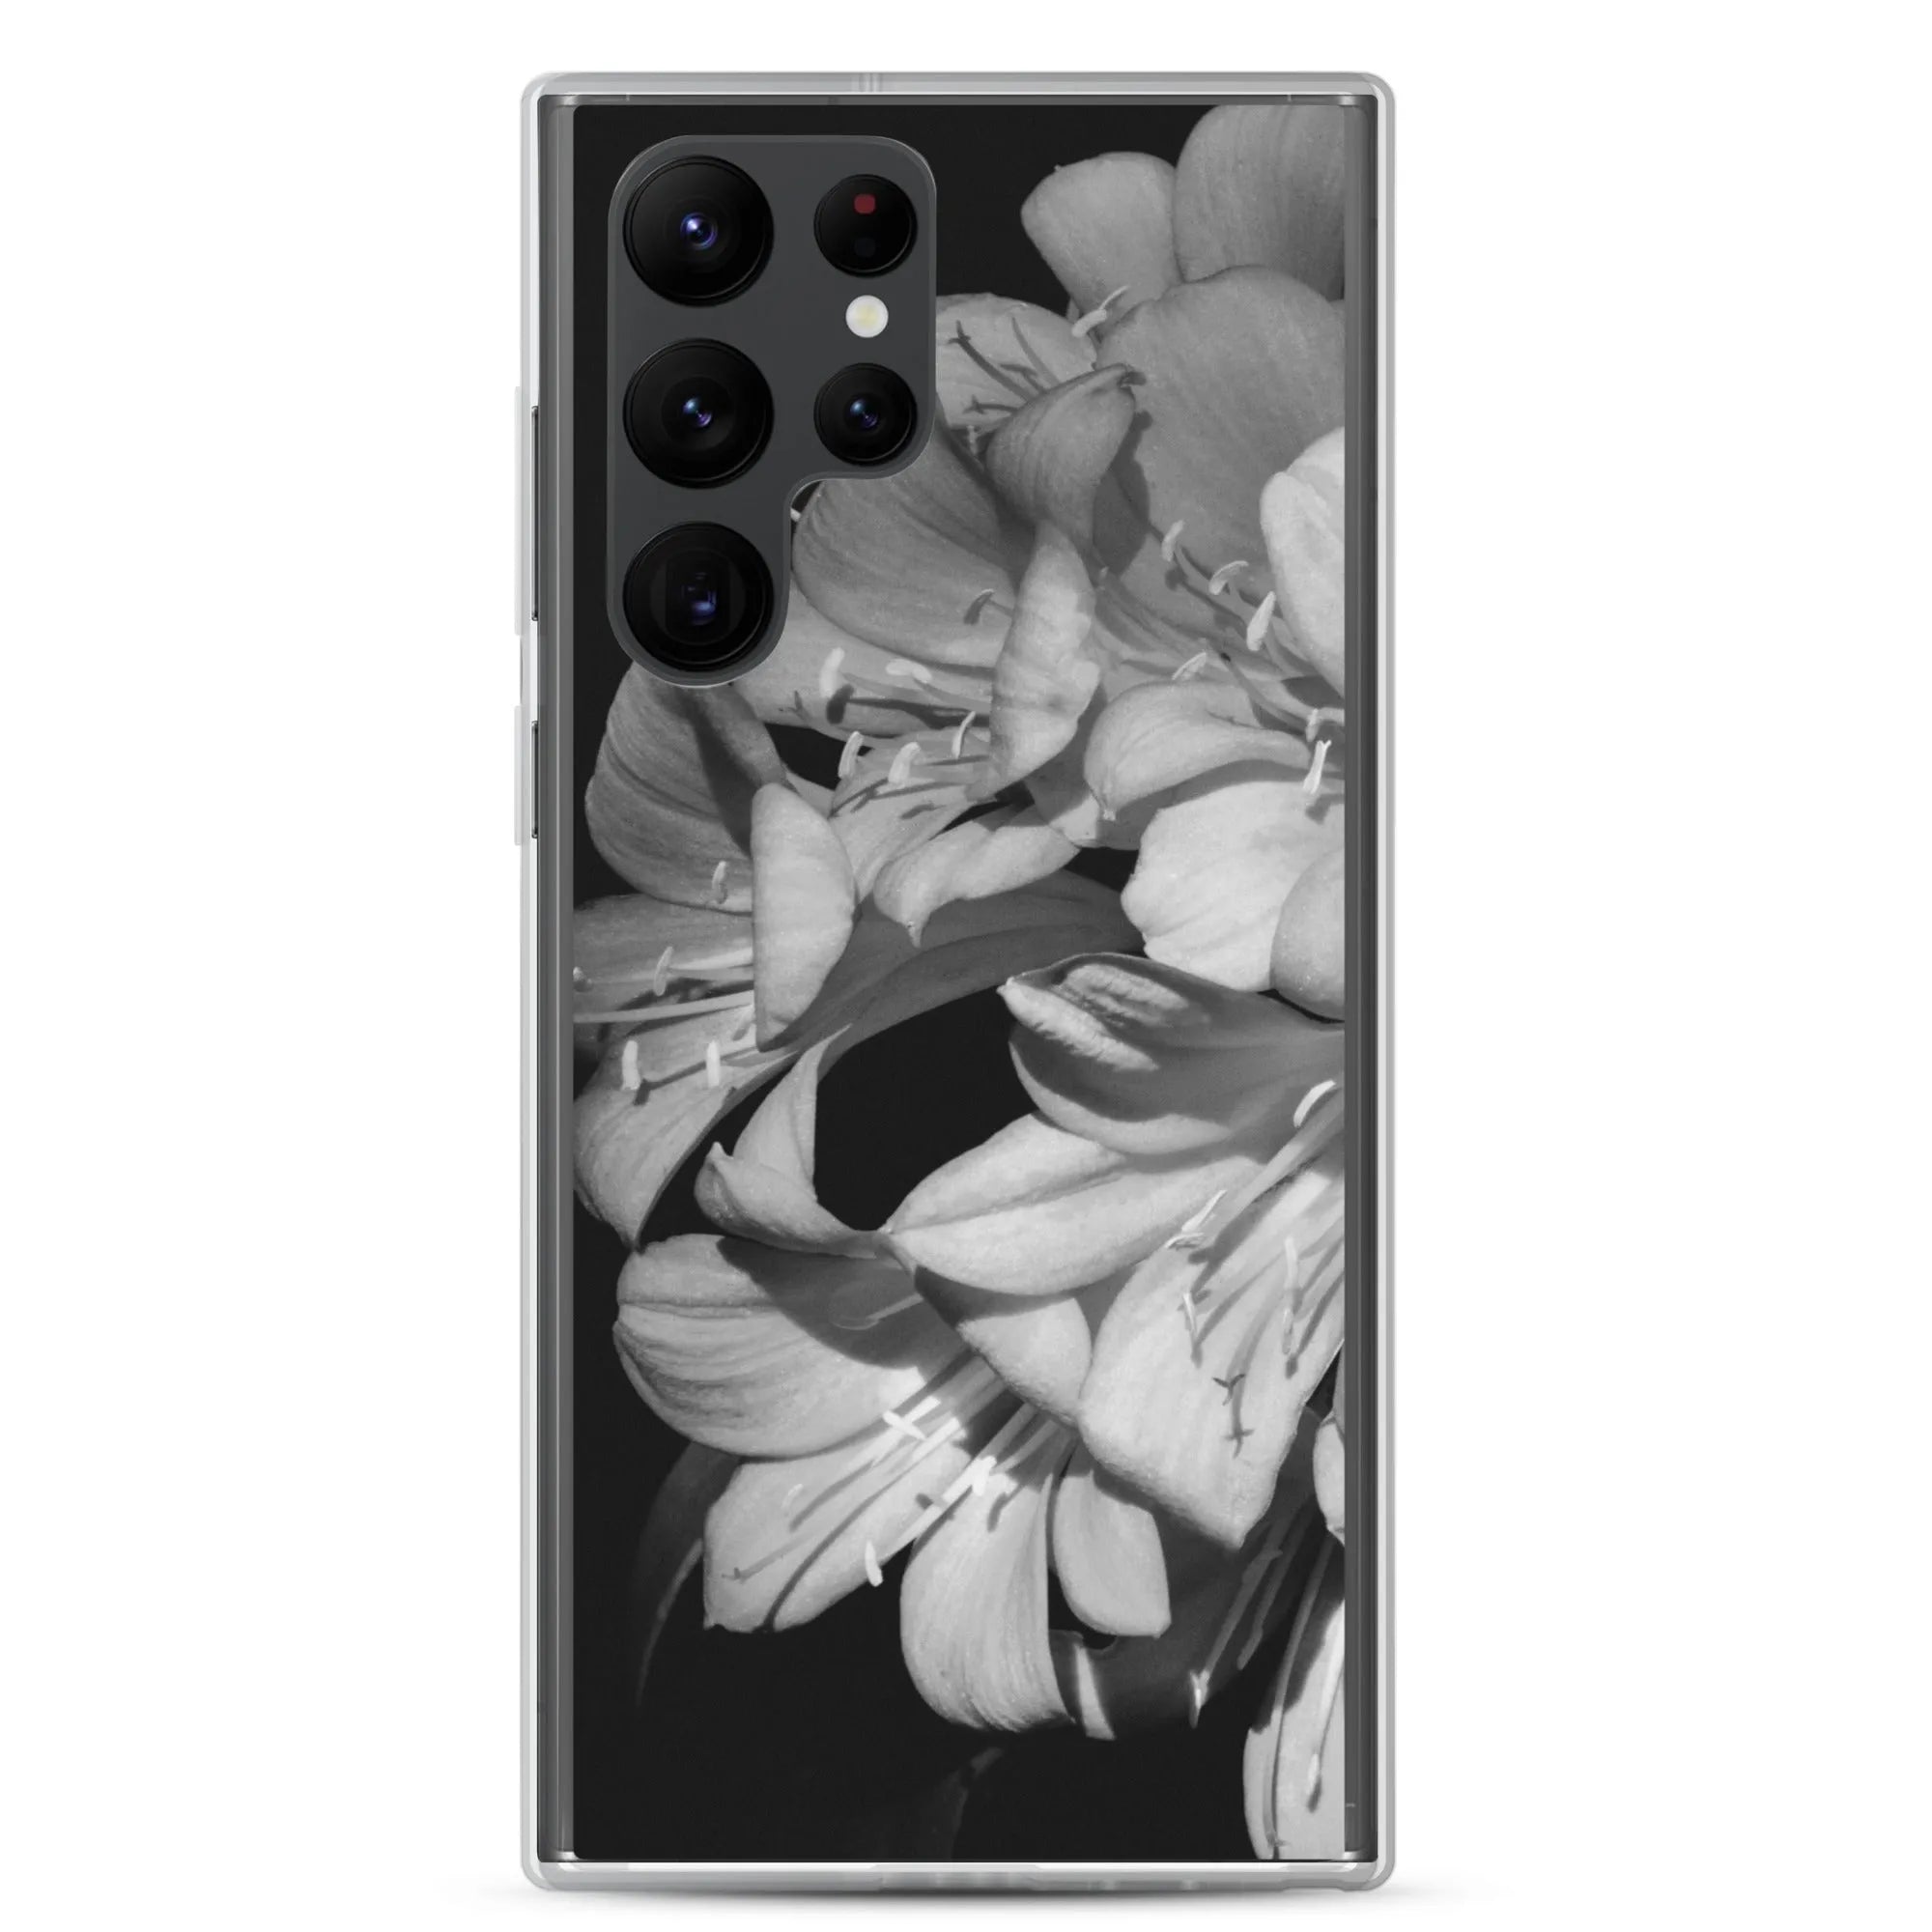 Flower Power Samsung Galaxy Case - black And White - Samsung Galaxy S22 Ultra - Mobile Phone Cases - Aesthetic Art